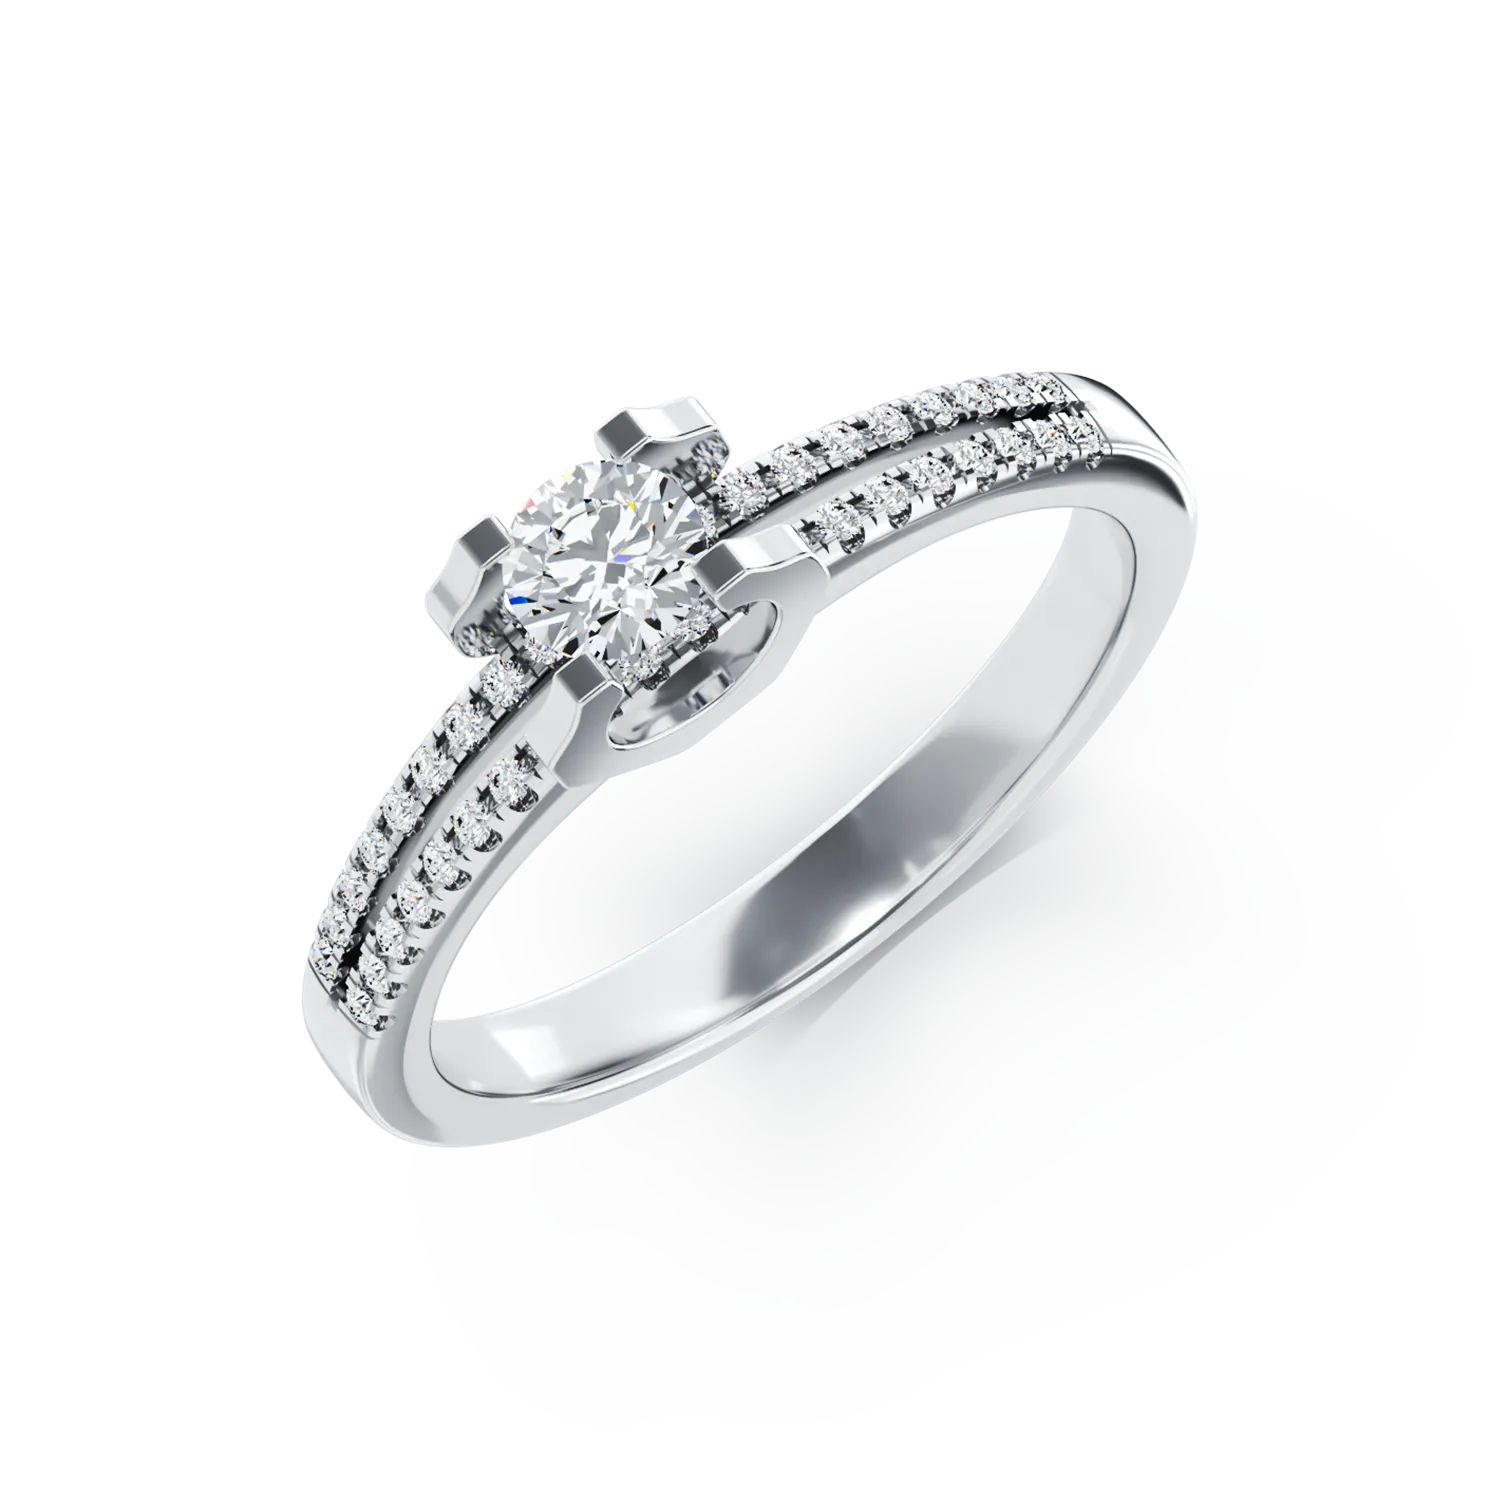 18K white gold engagement ring with 0.19ct diamond and 0.15ct diamonds